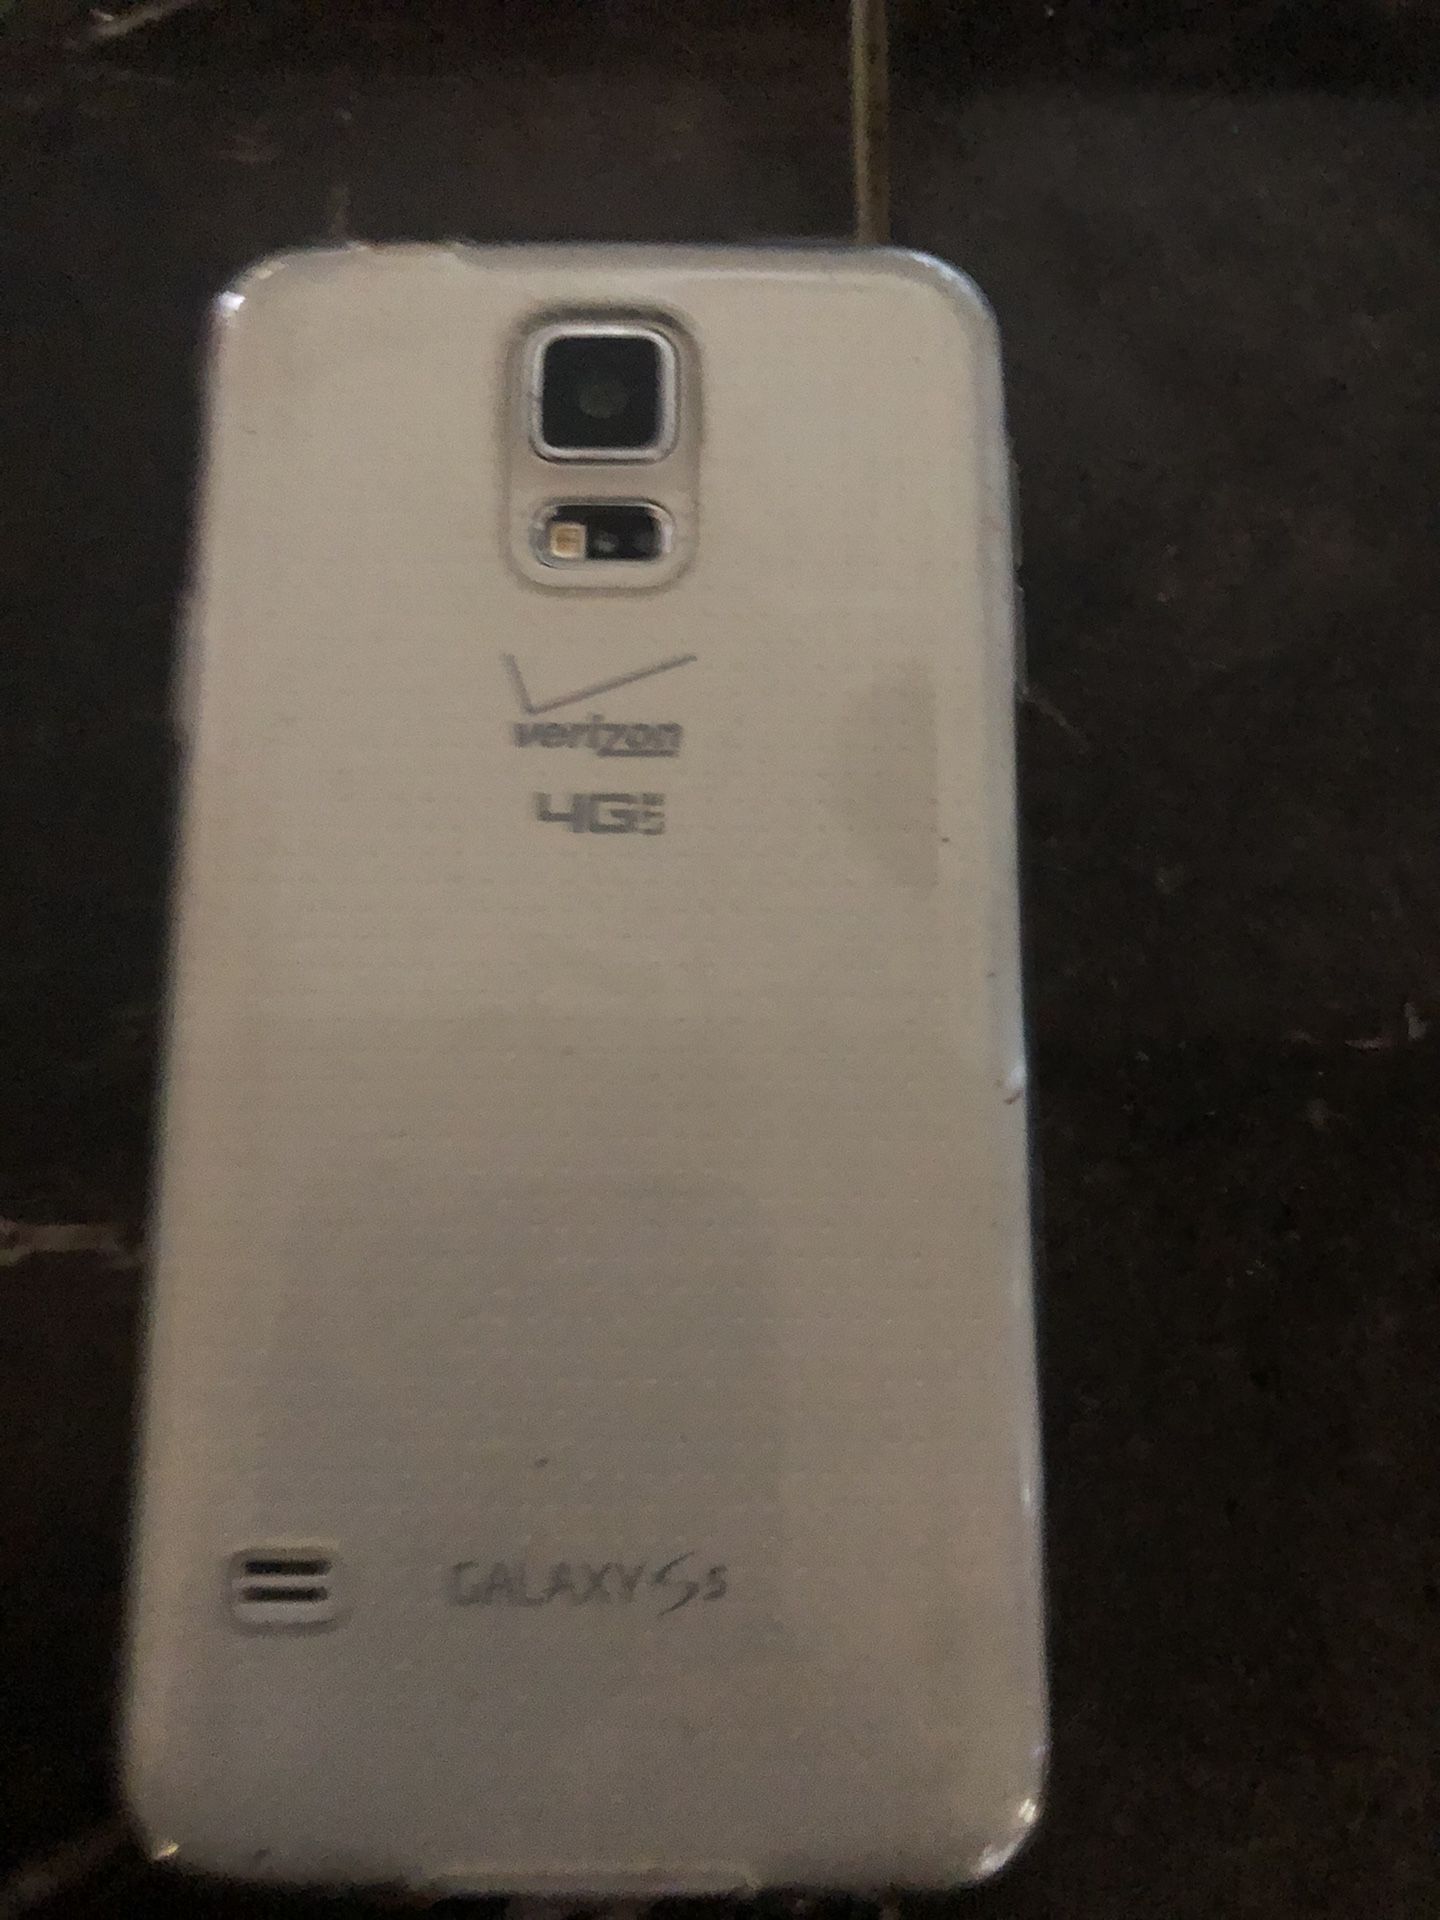 Samsung Galaxy s5 works good was connected on a Verizon network